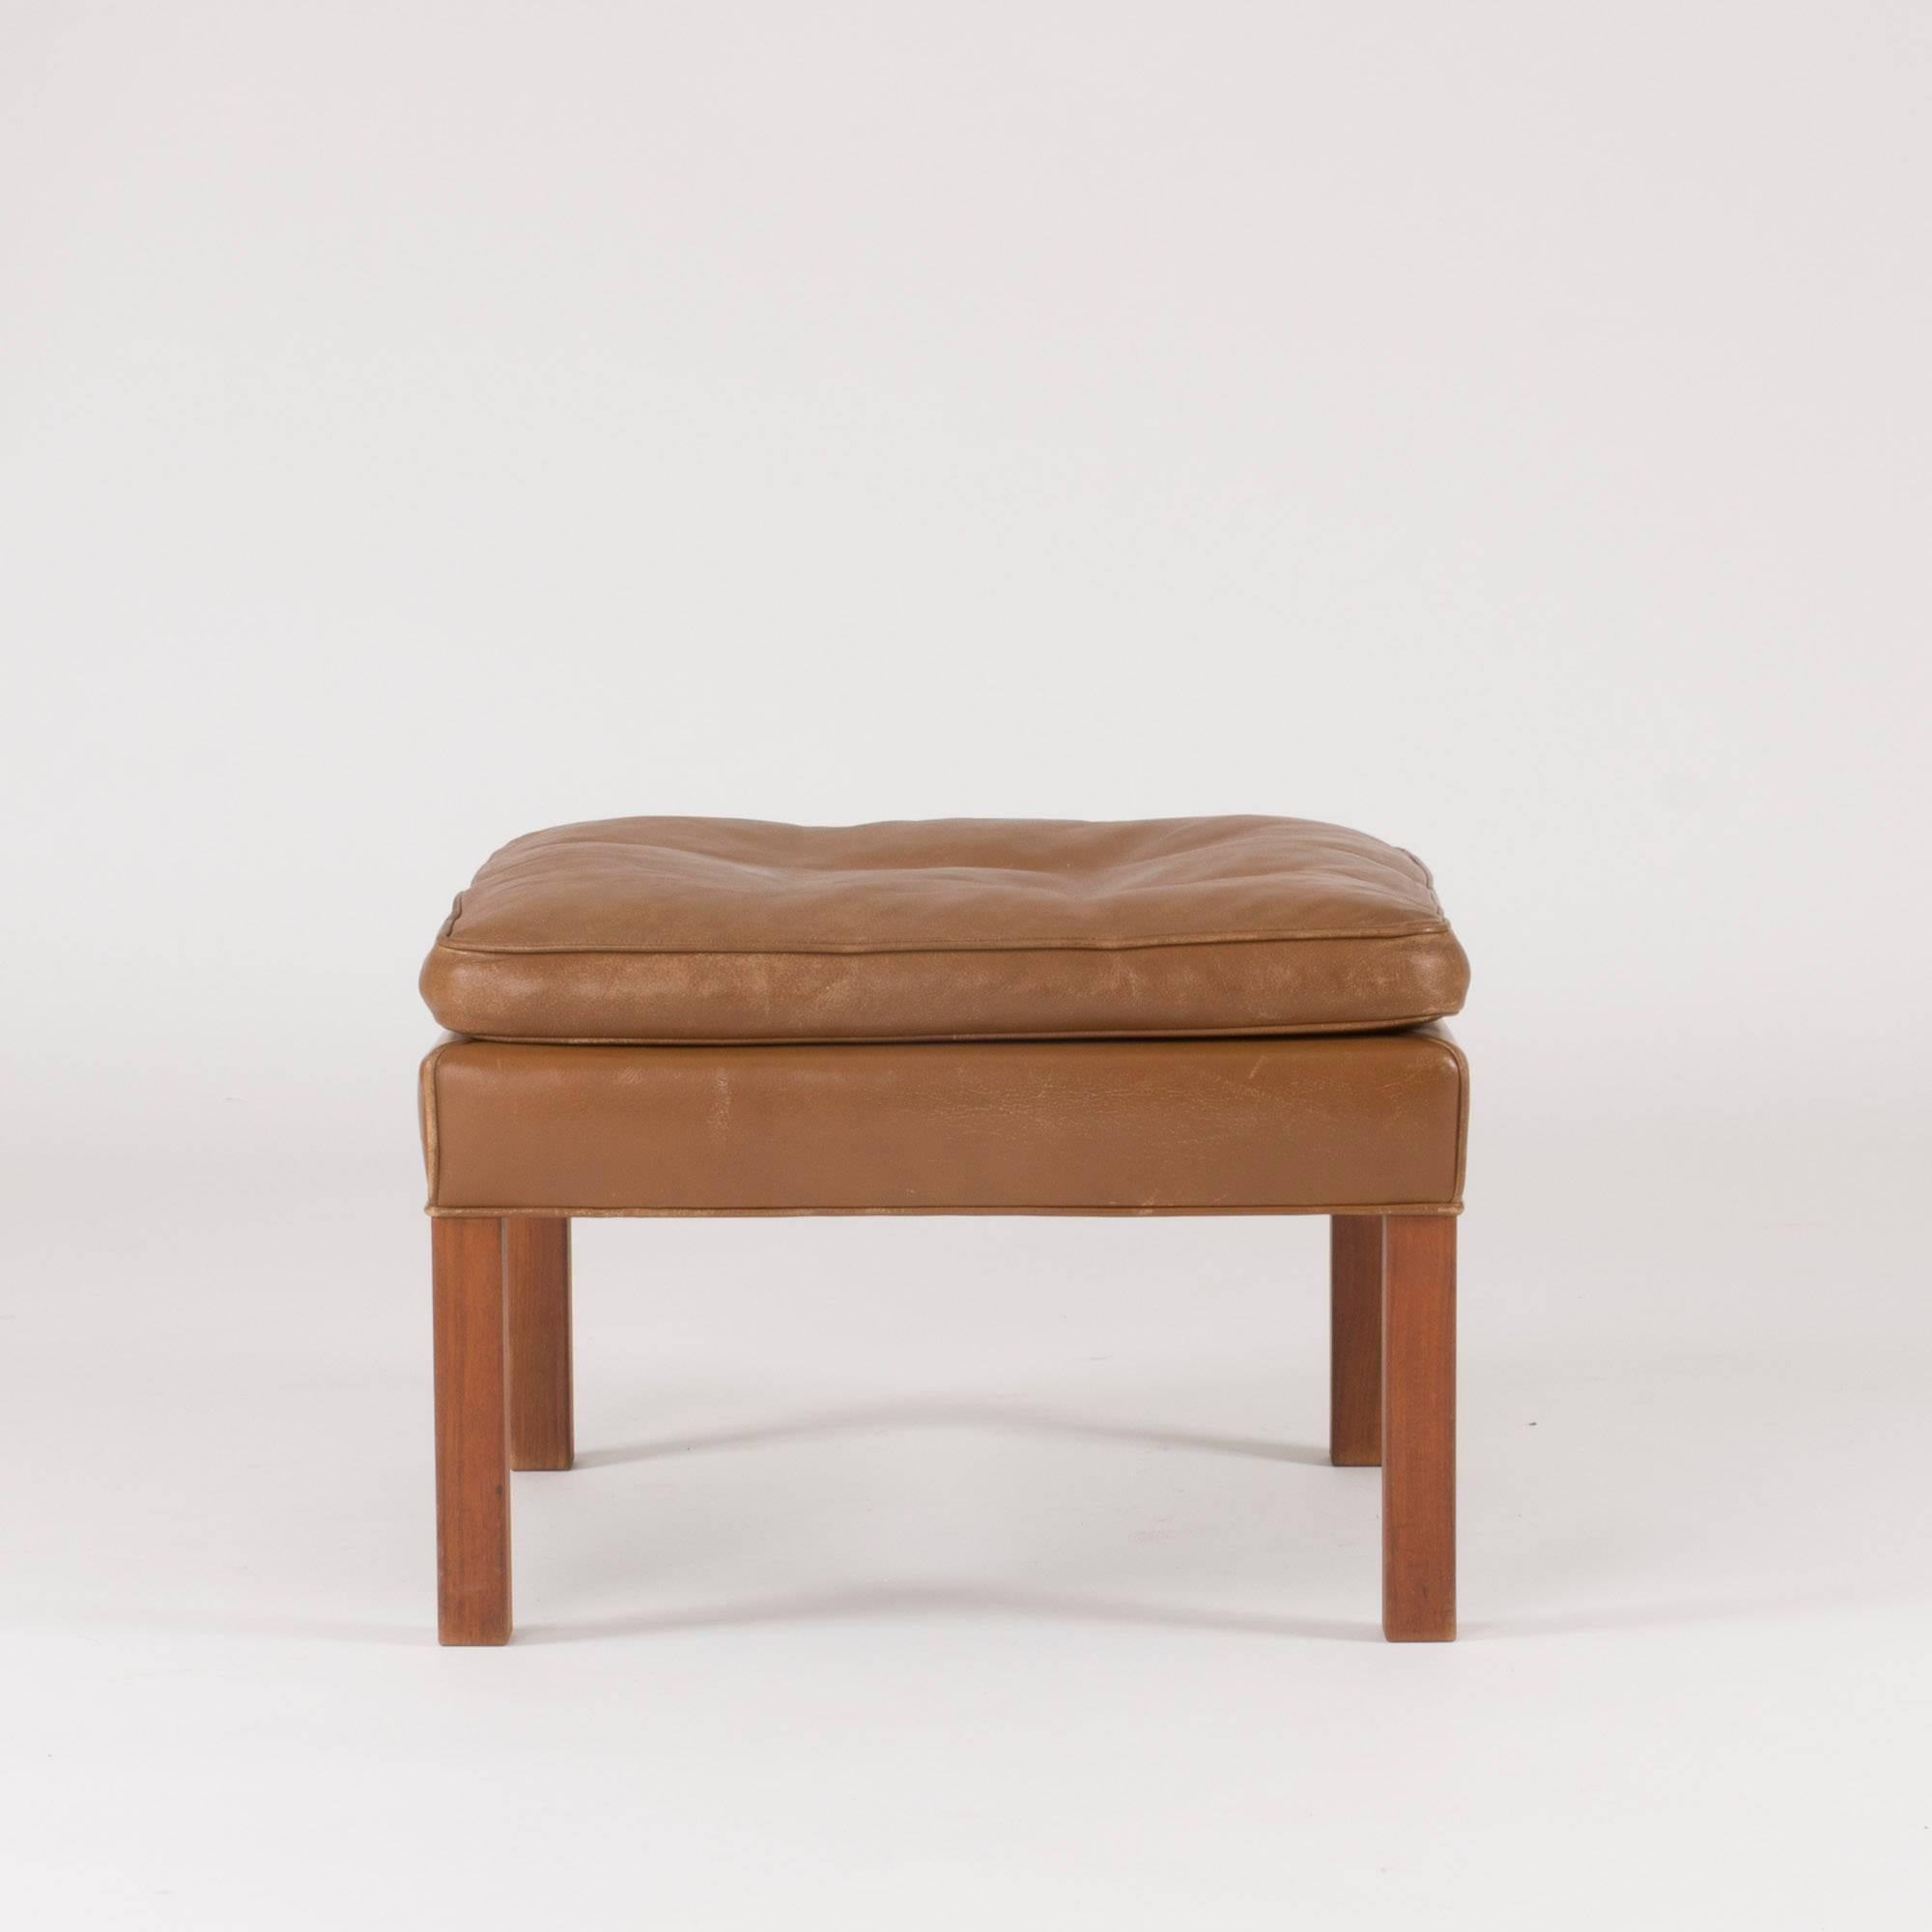 Elegant, timeless and comfortable leather ottoman by Børge Mogensen that can be combined with his sofas and armchairs or enjoyed by itself. Brown leather and oak legs.